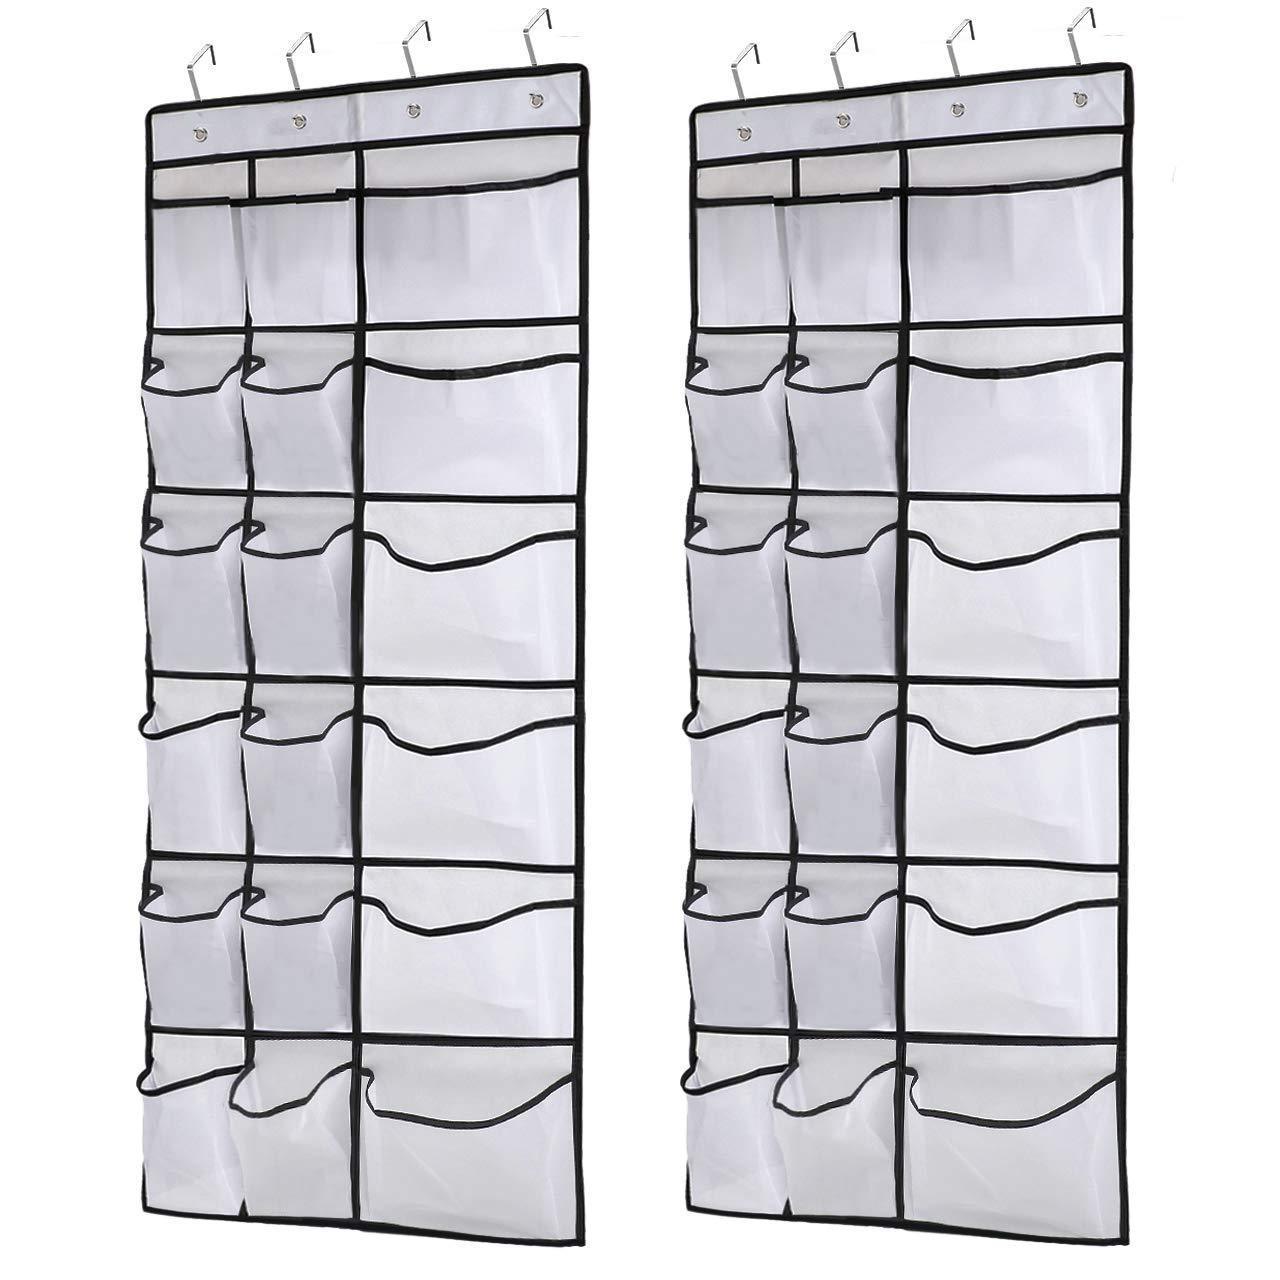 Kootek 2 Pack Over The Door Shoe Organizers, 12 Mesh Pockets + 6 Large Mesh Storage Various Compartments Hanging Shoe Organizer with 8 Hooks Shoes Holder for Closet Bedroom, White (59 x 21.6 inch)